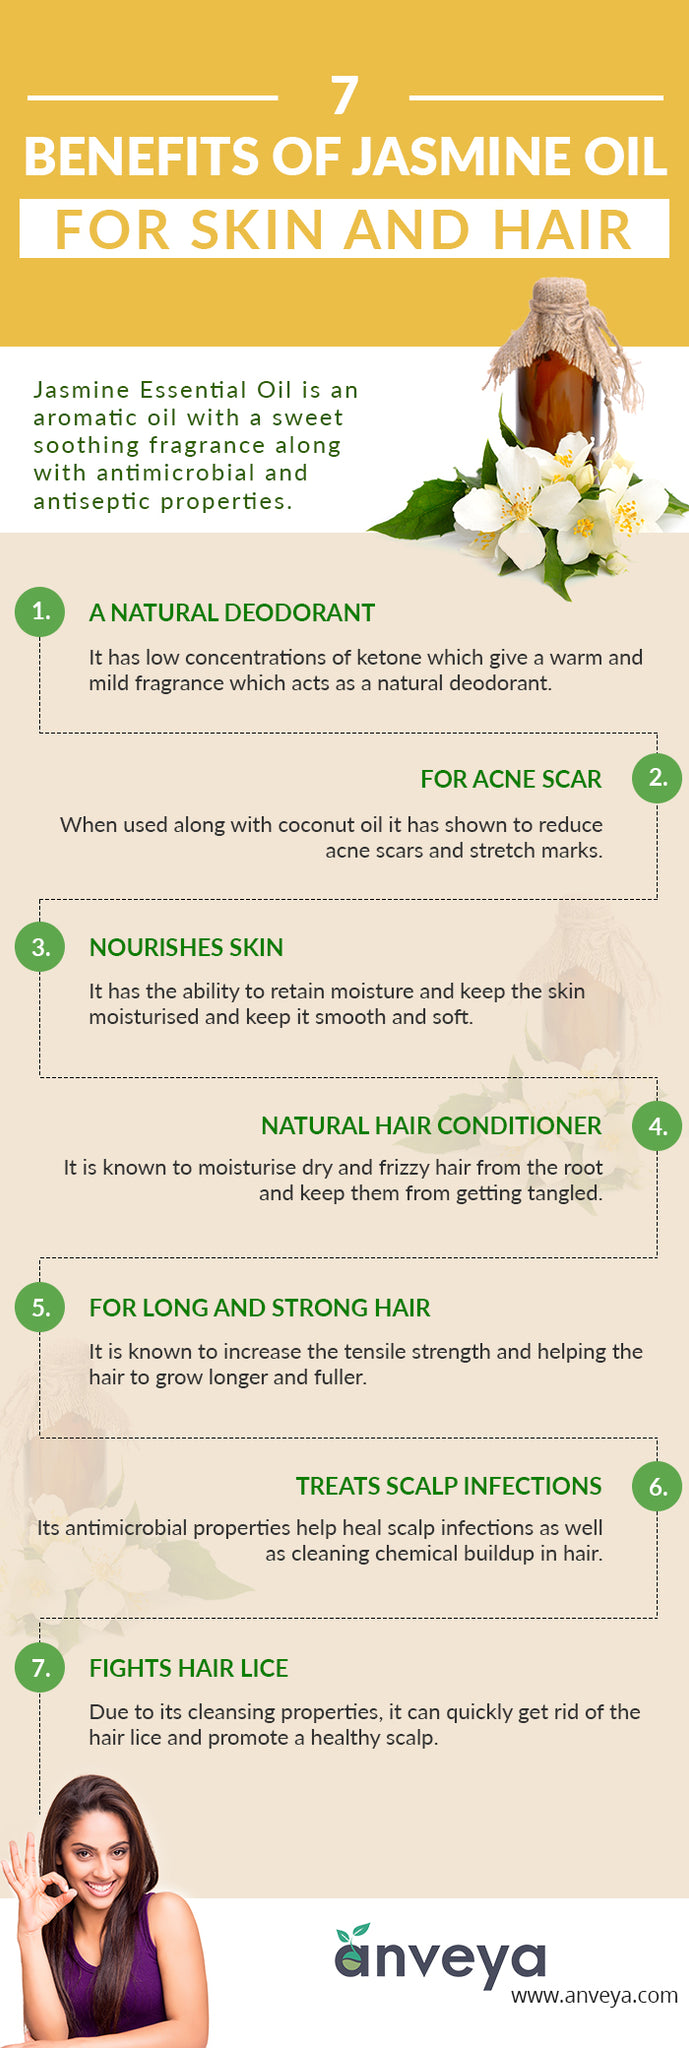 Jasmine Oil For Hair Growth - What Is It And How Does It Work